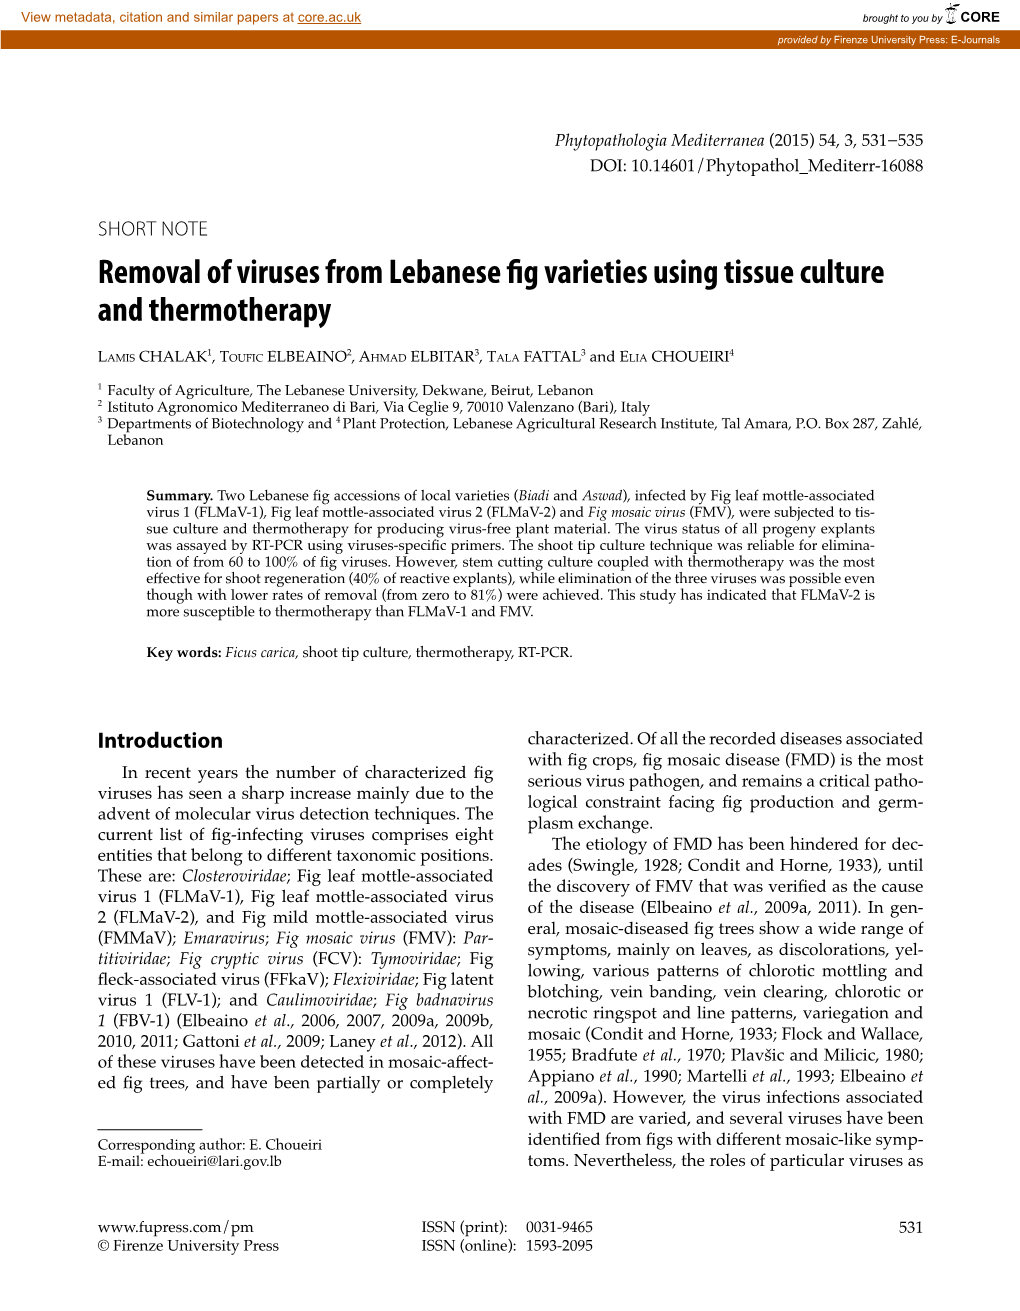 Removal of Viruses from Lebanese Fig Varieties Using Tissue Culture and Thermotherapy